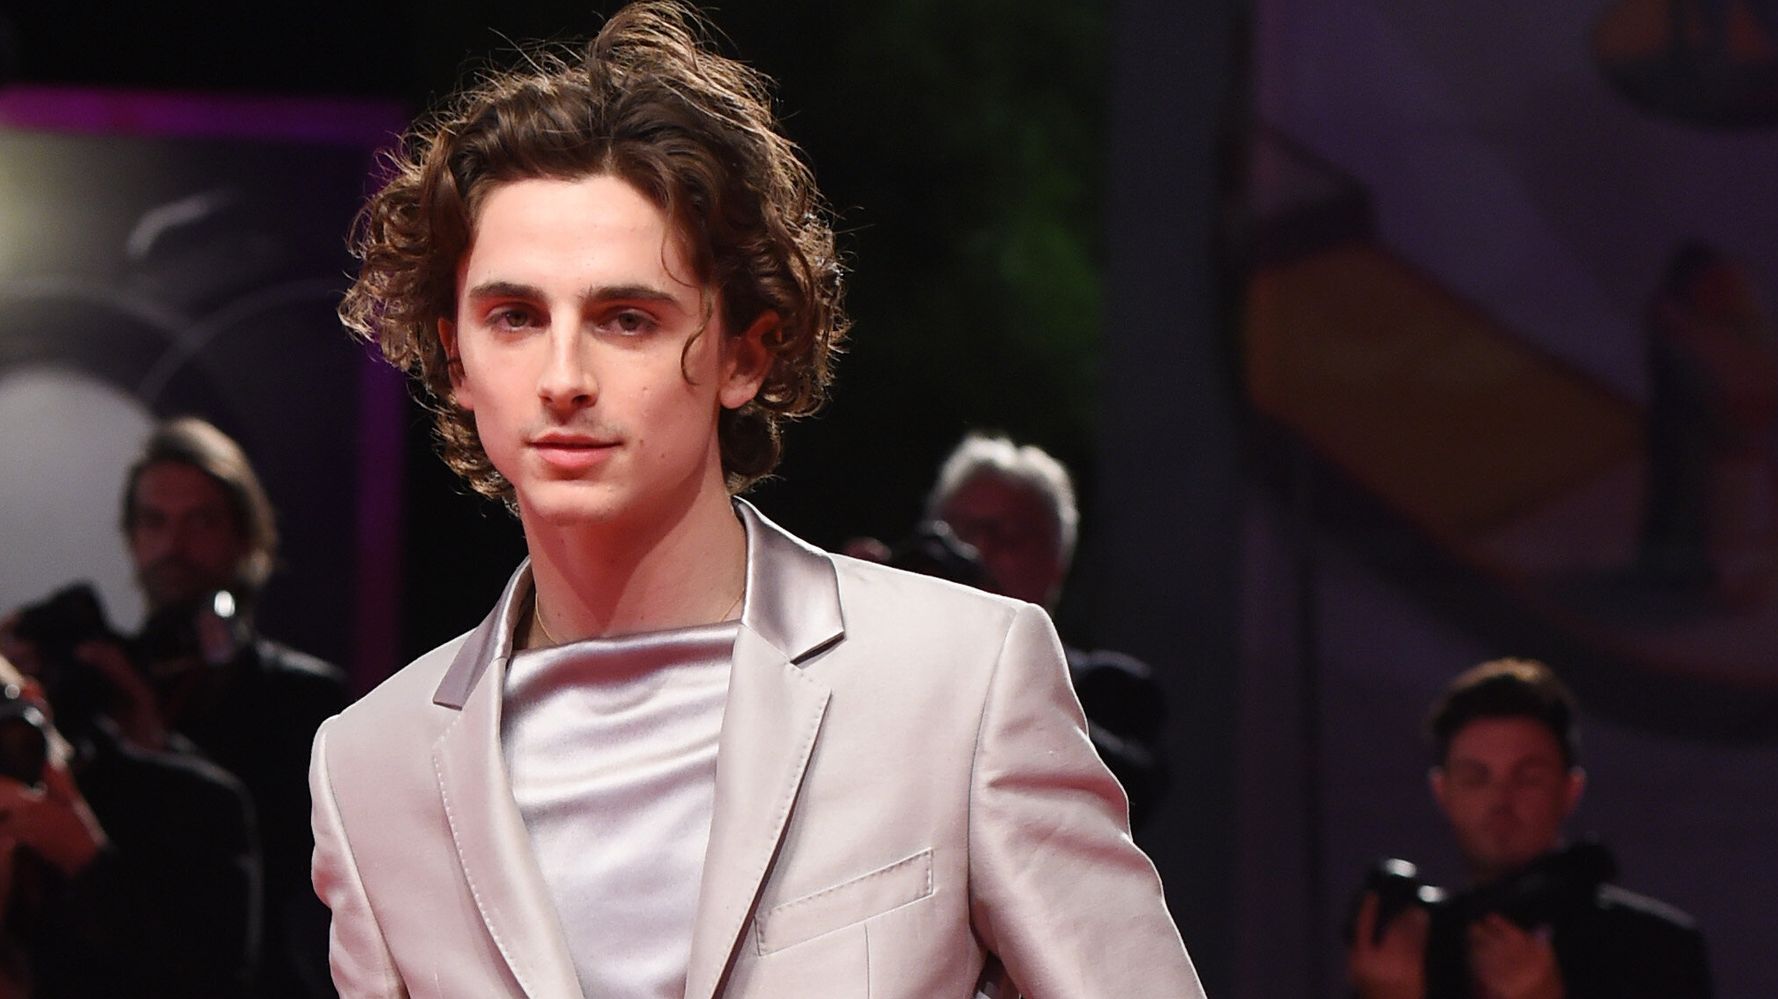 Timothée Chalamet Wore A Belted Silver Suit And Now We All Want One |  Huffpost Life